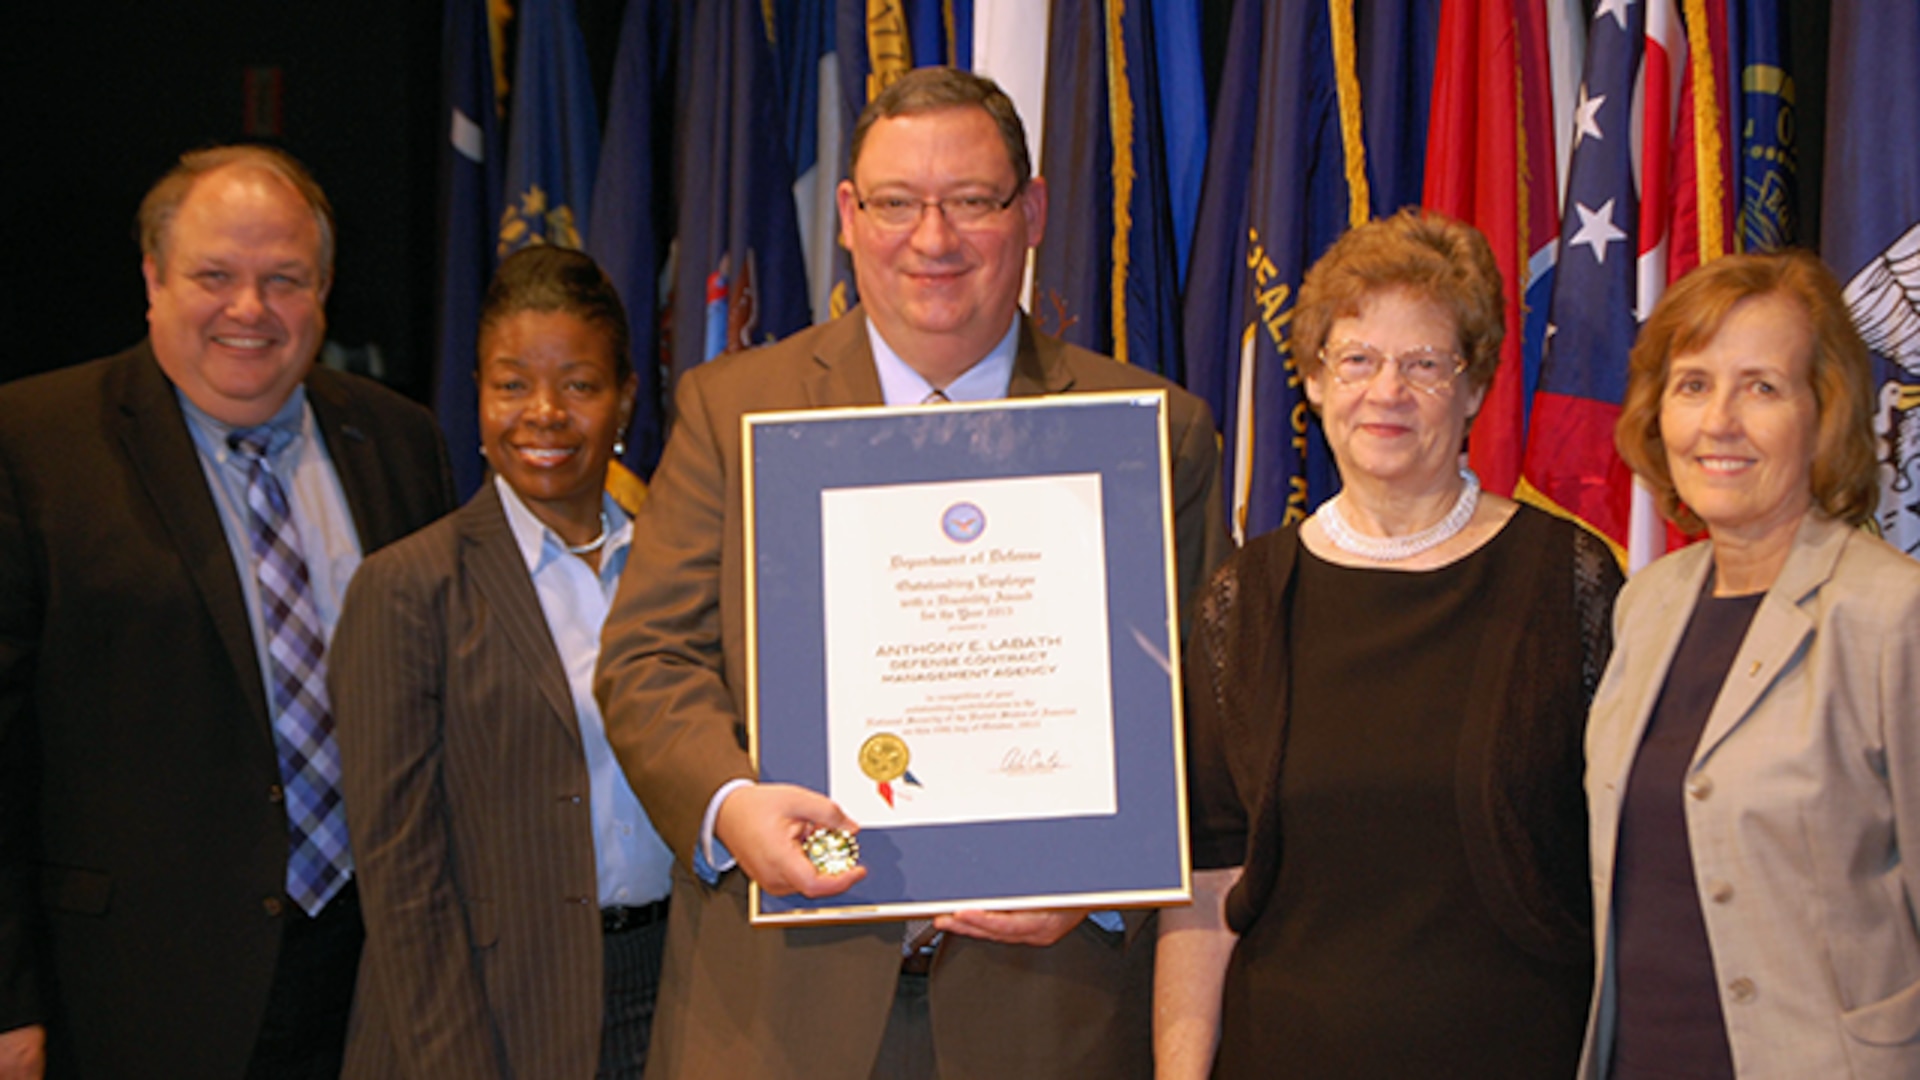 Anthony Labath, Defense Contract Management Agency Engineering and Analysis general engineer, stands with his wife Judith (second from right) and agency leadership representatives James Russell, deputy director; Linda Galimore, Equal Employment Opportunity director; and Karron Small, E&A executive director, at the 2015 Secretary of Defense Award to Outstanding Civilian and Service Members with Disabilities ceremony Nov. 3 at the Pentagon. Labath was one of 19 recipients of the award presented to those who epitomize the qualities and core values of the Department of Defense, are committed to excellence, and contribute significantly to the ability to keep the nation safe and secure. 